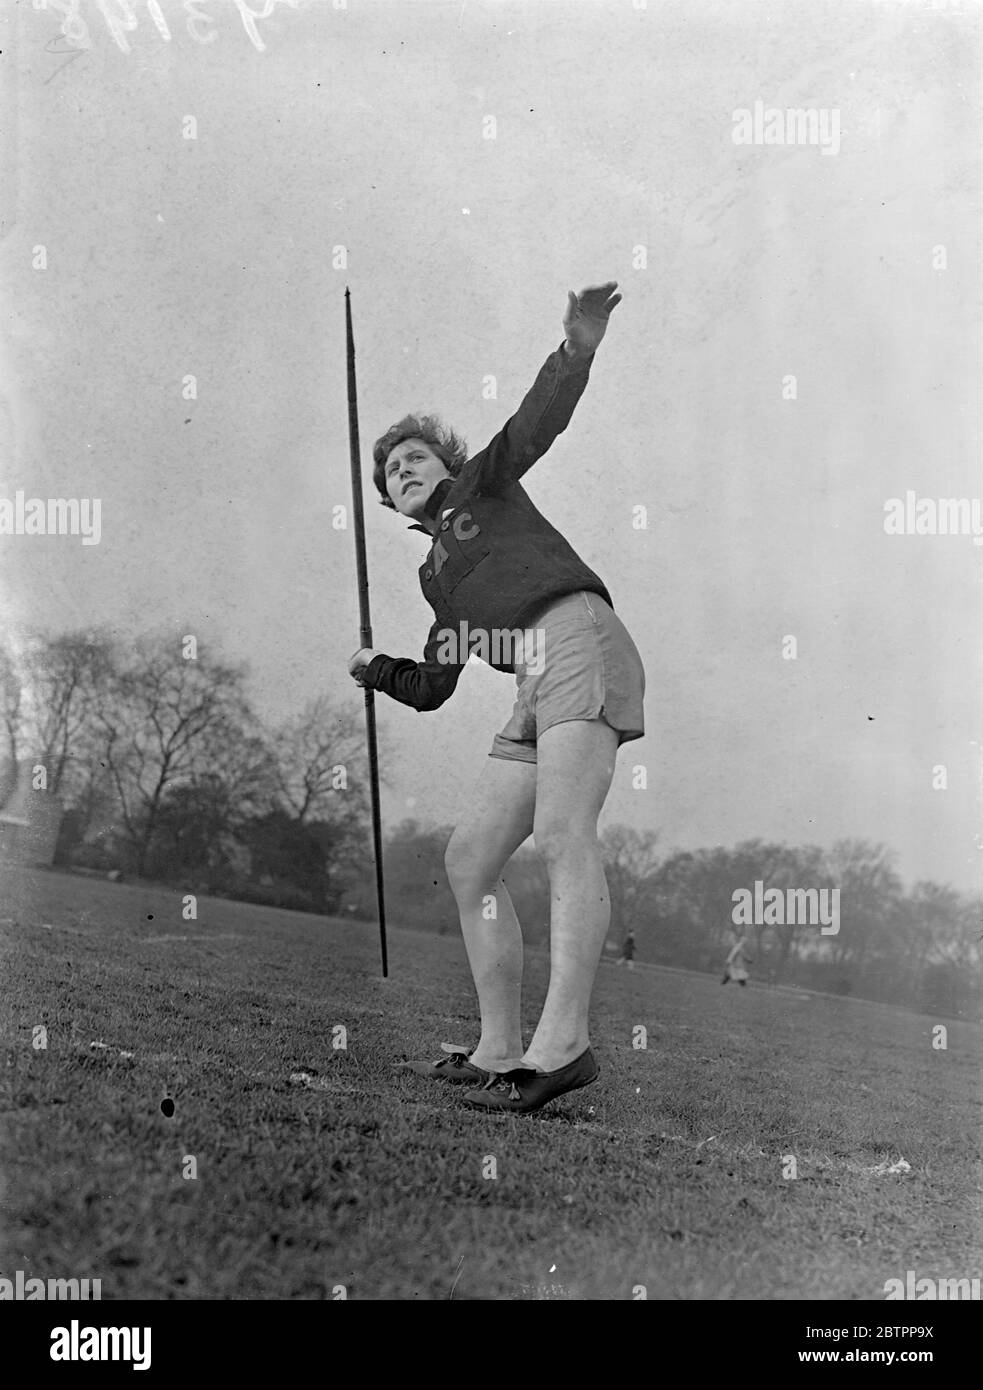 Spirit of sport!. In a statuesque pose and with hair windblown, Miss Maud Curson, the Middlesex Ladies javelin champion, typifies of the modern athlete girl as she practices in Battersea Park, London today (Sunday). 31 January 1938 Stock Photo